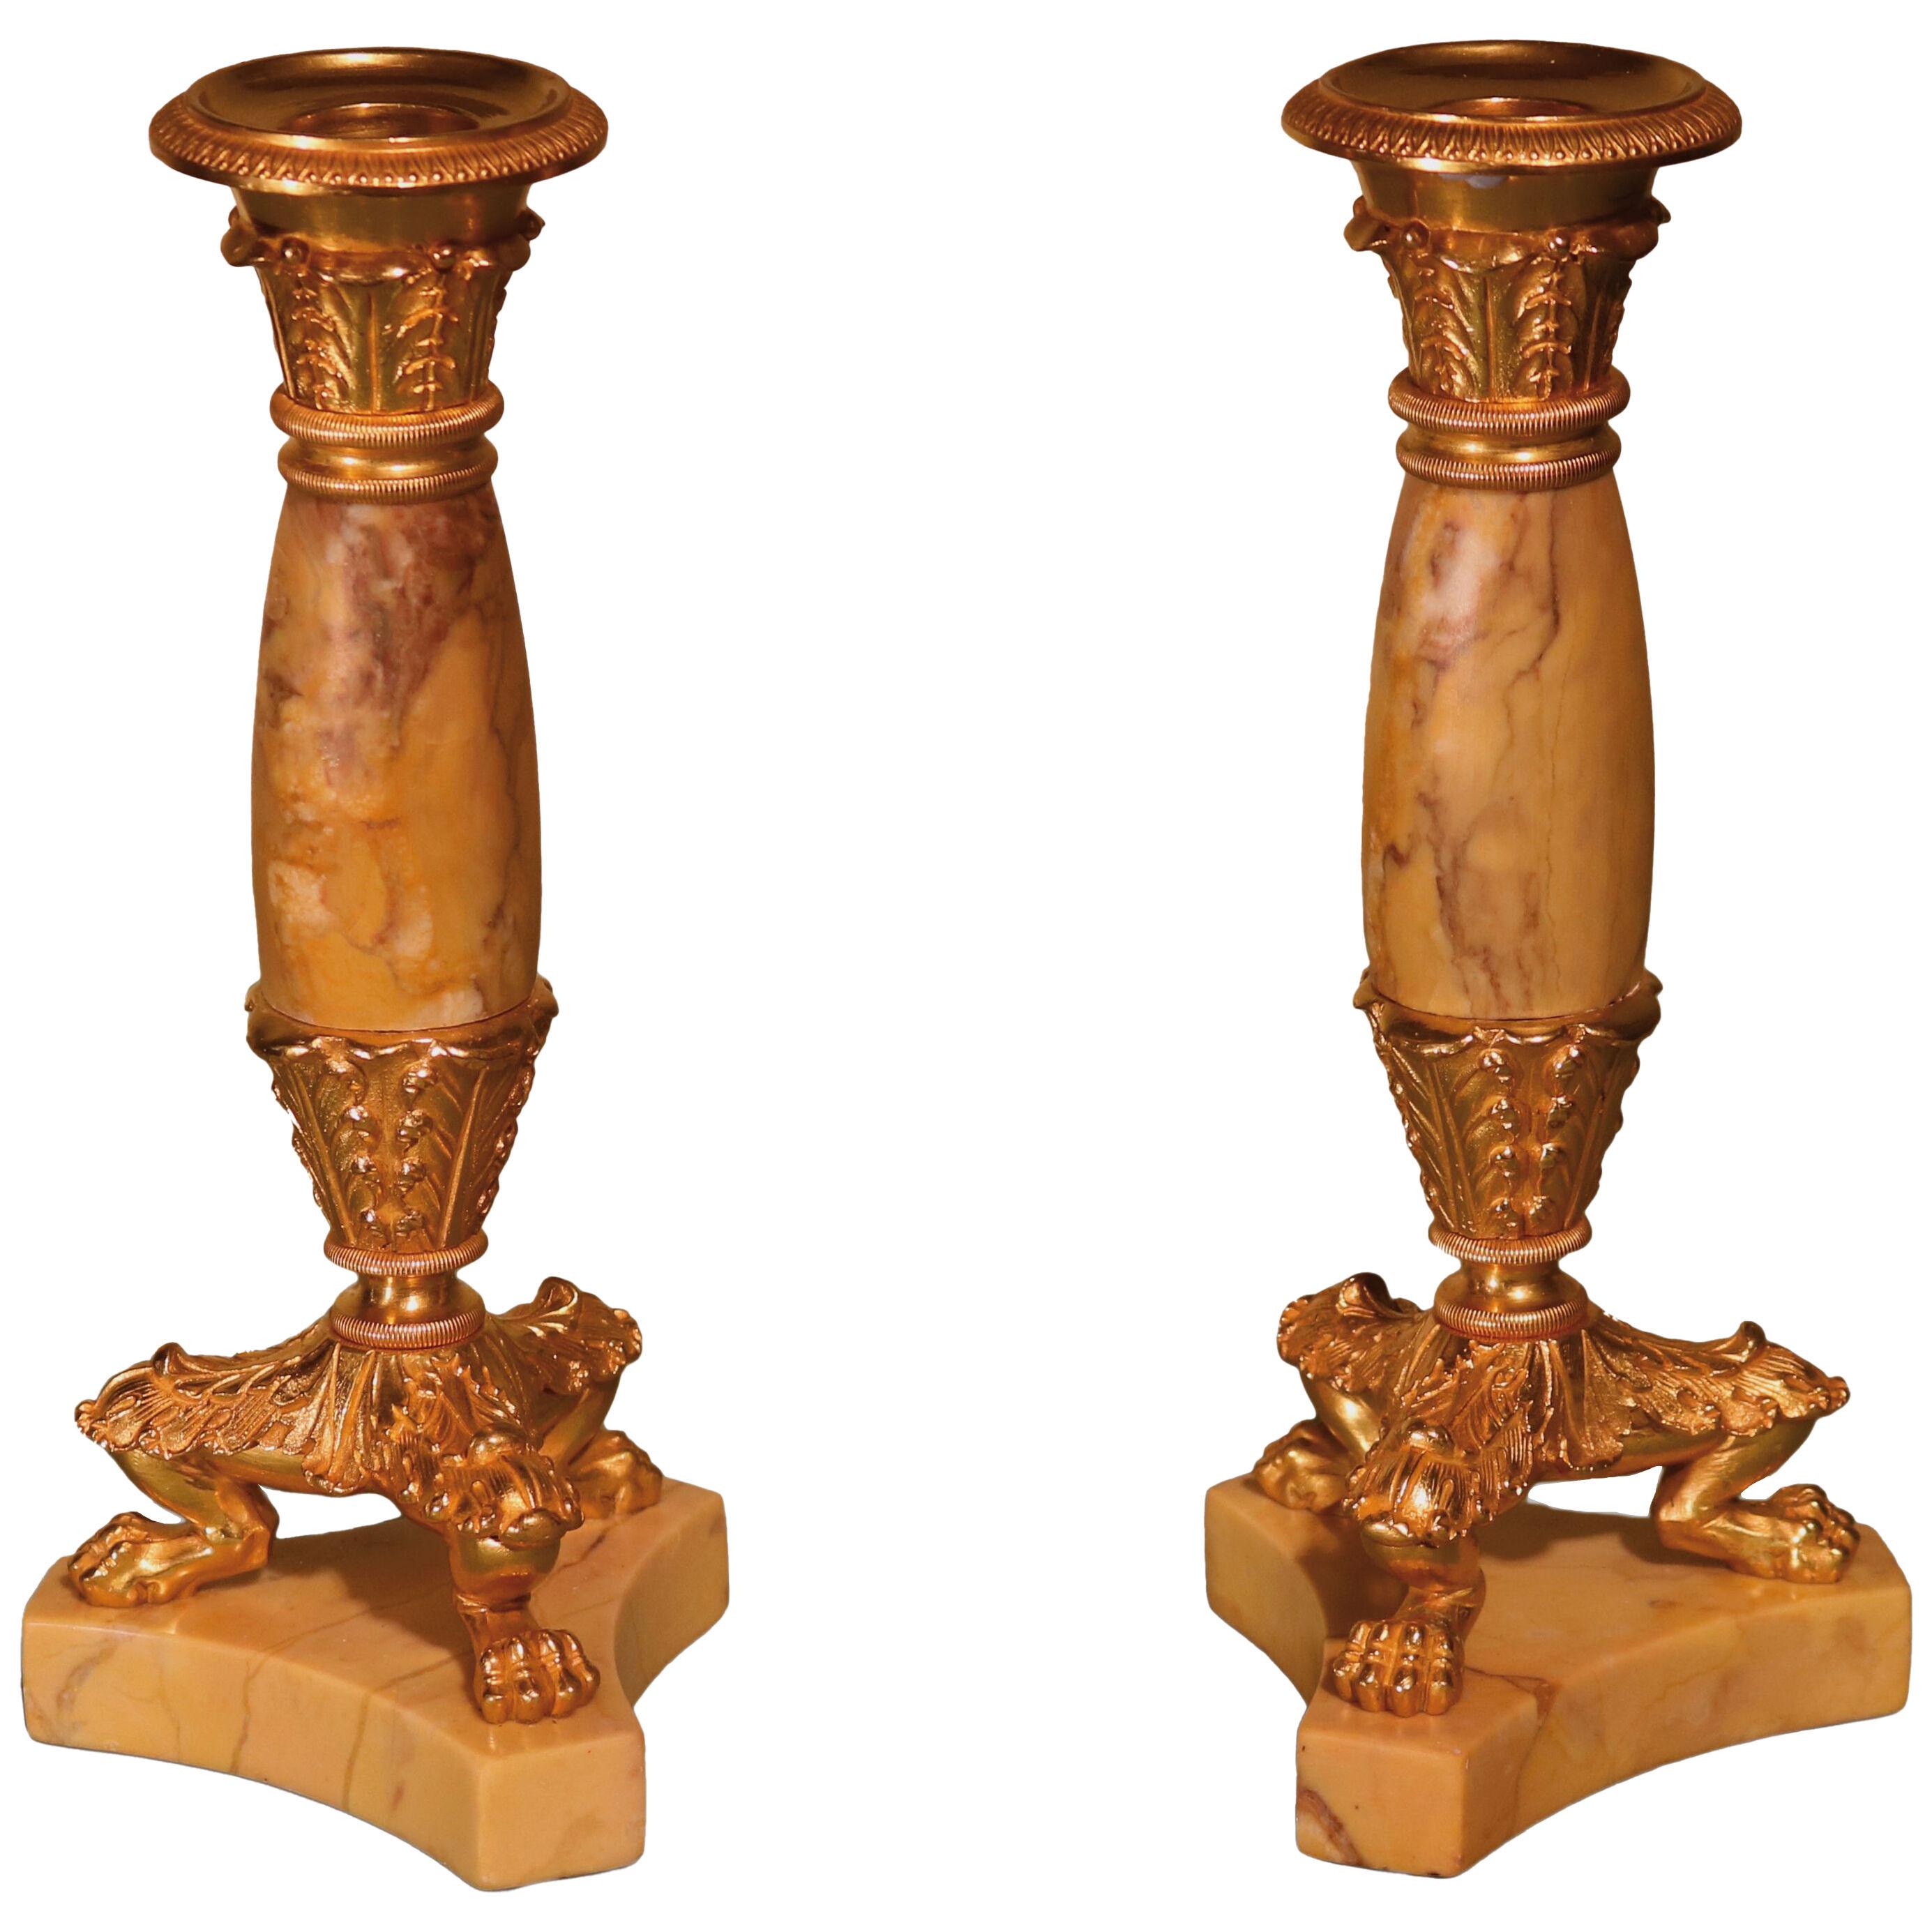 A pair of early 19th century bronze and ormolu bulbous shaped candlesticks